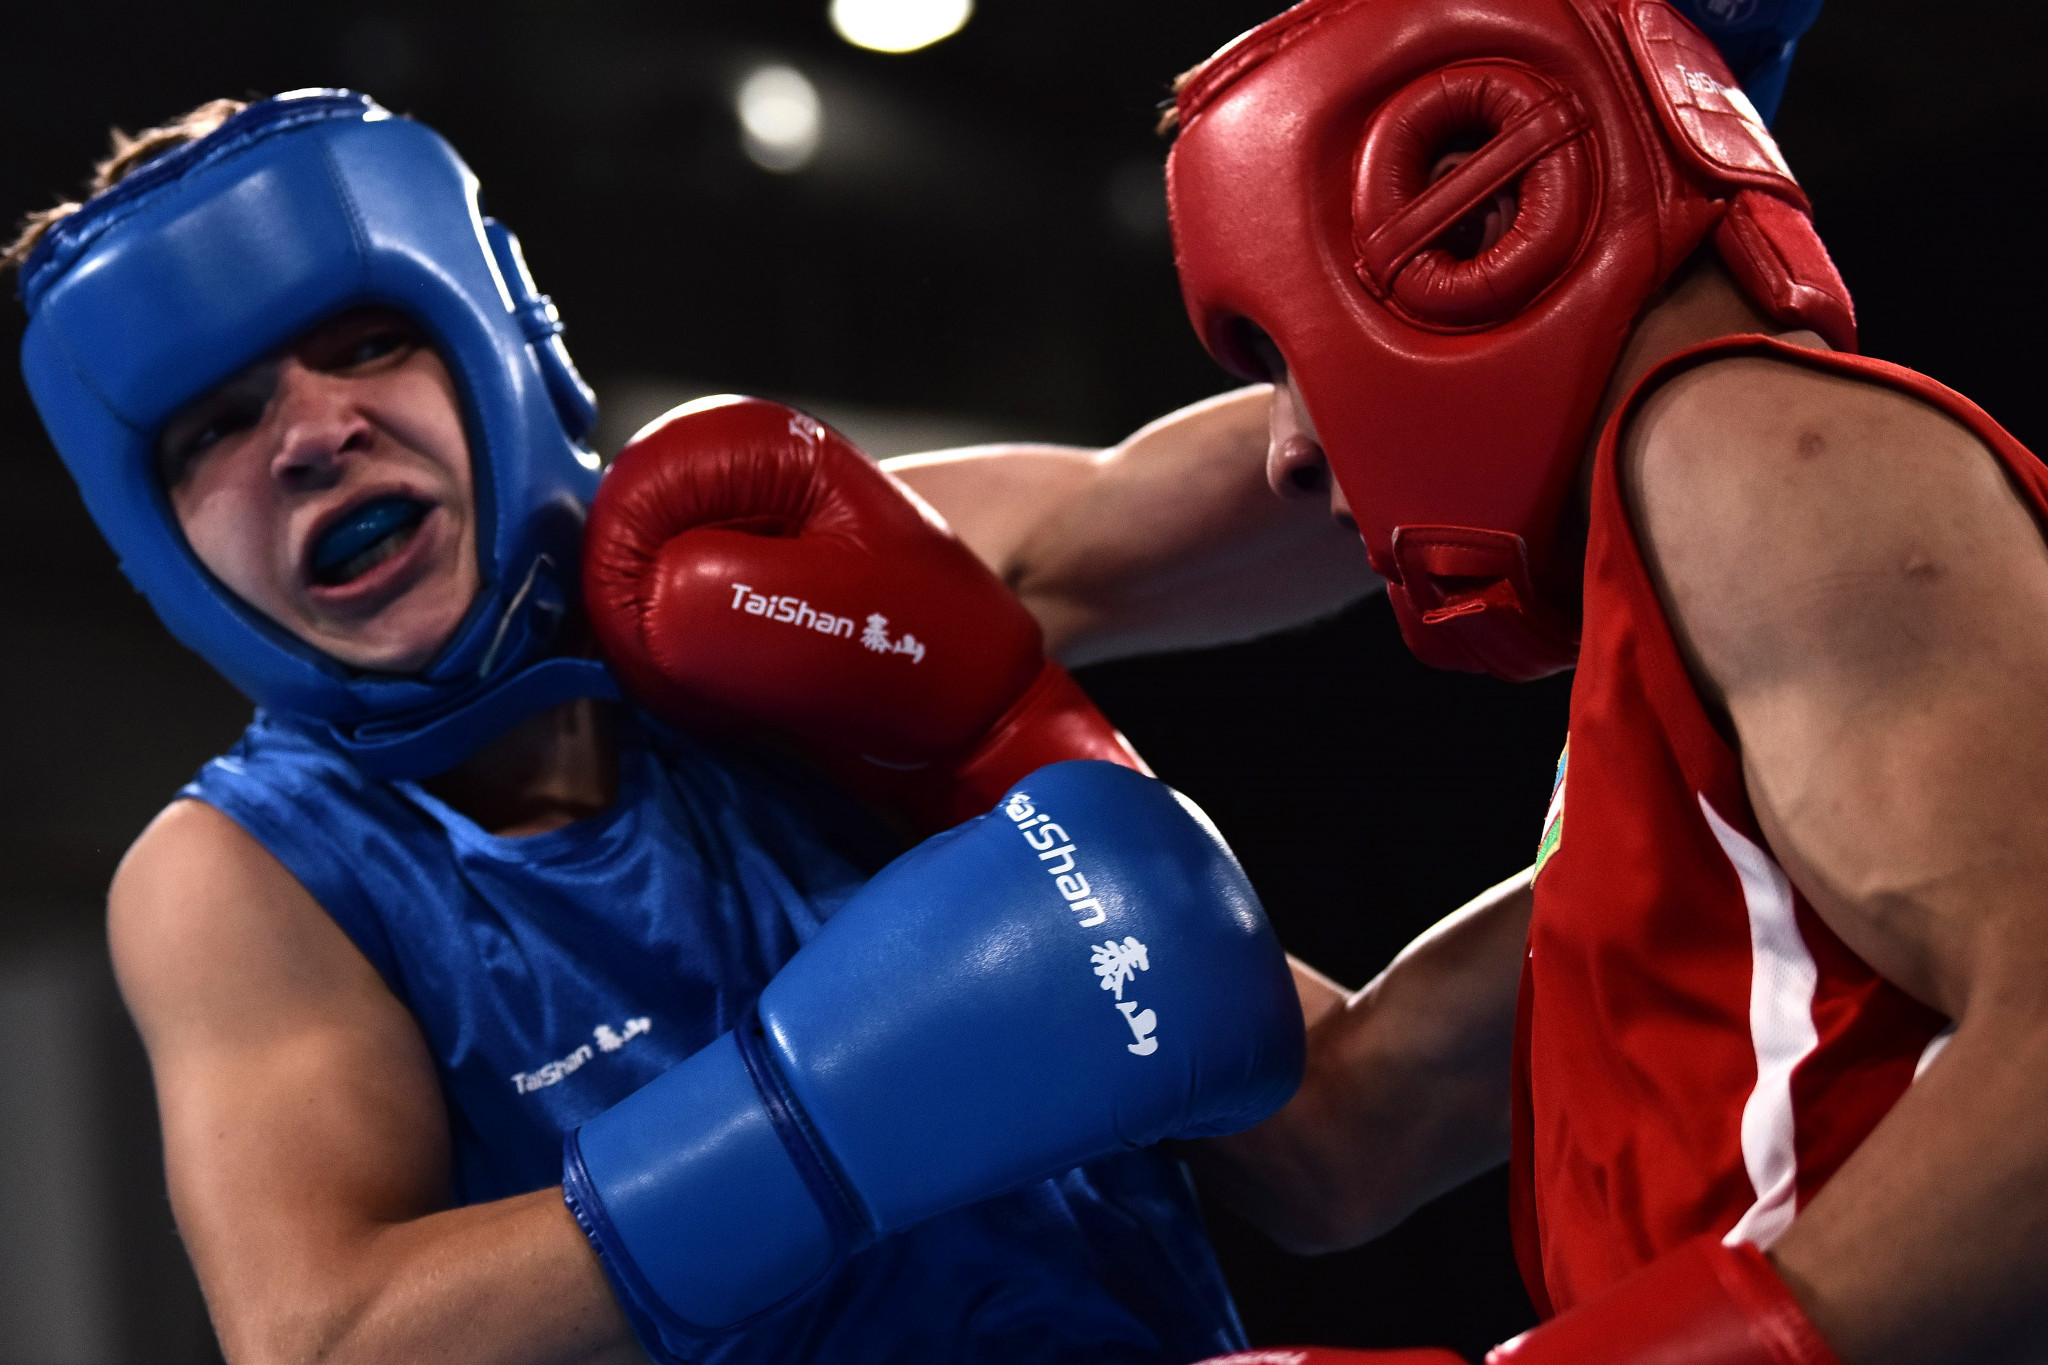 Youth Olympic boxing medallist Galinichev dies fighting for Ukraine in Russia war